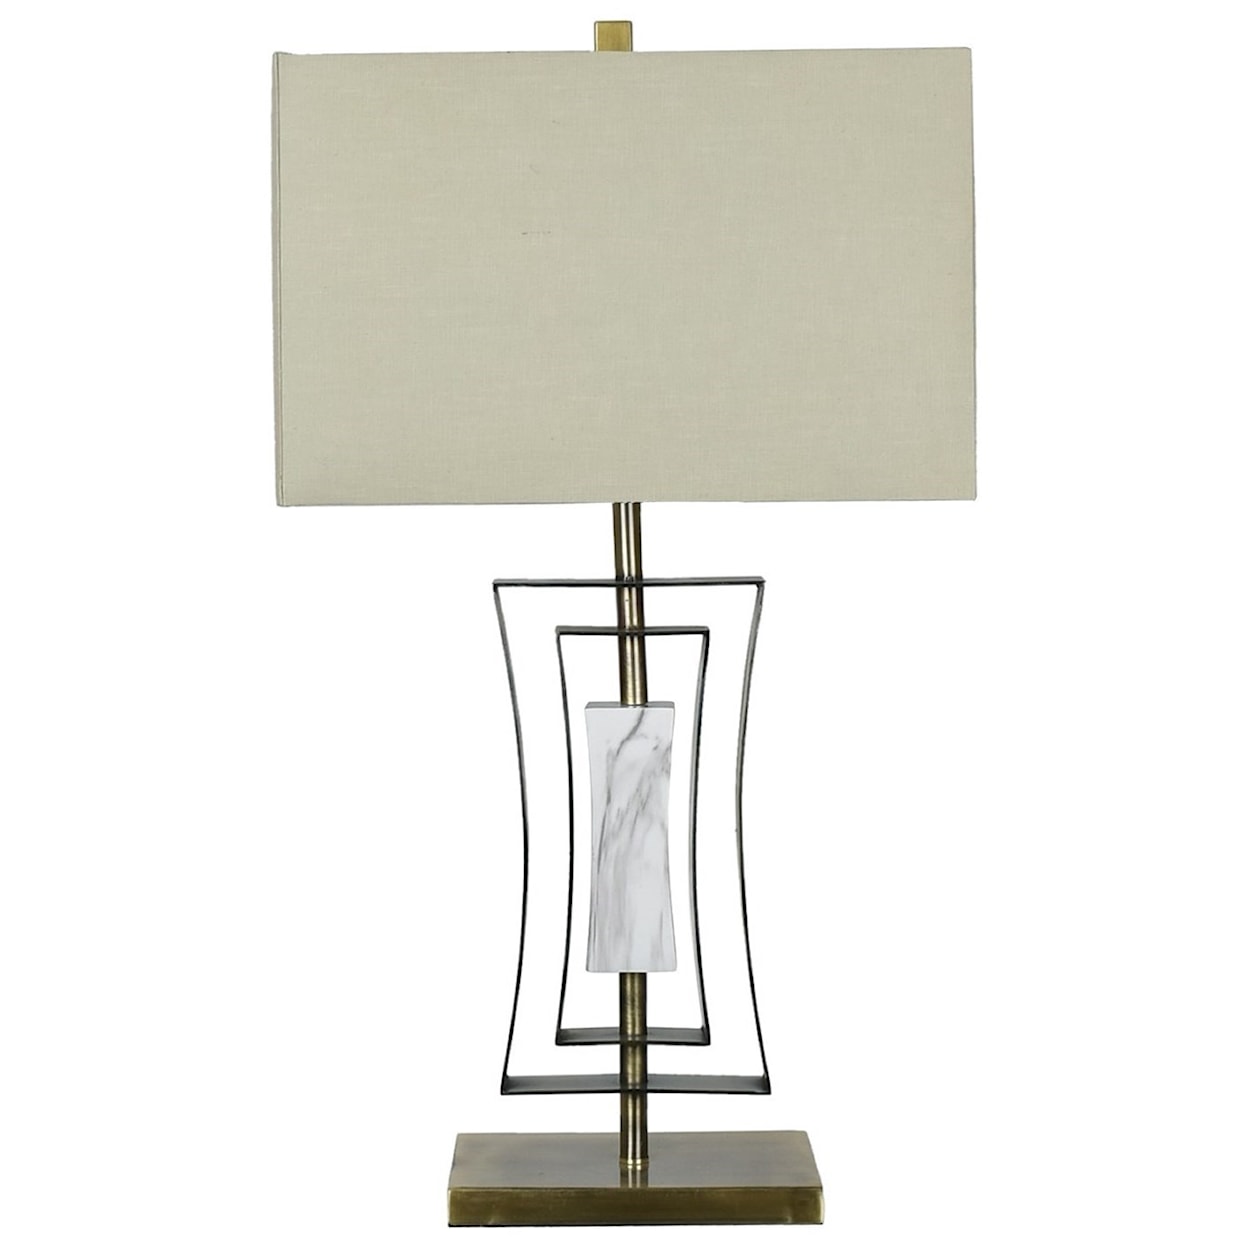 Crestview Collection Lighting Sloan Table Lamp